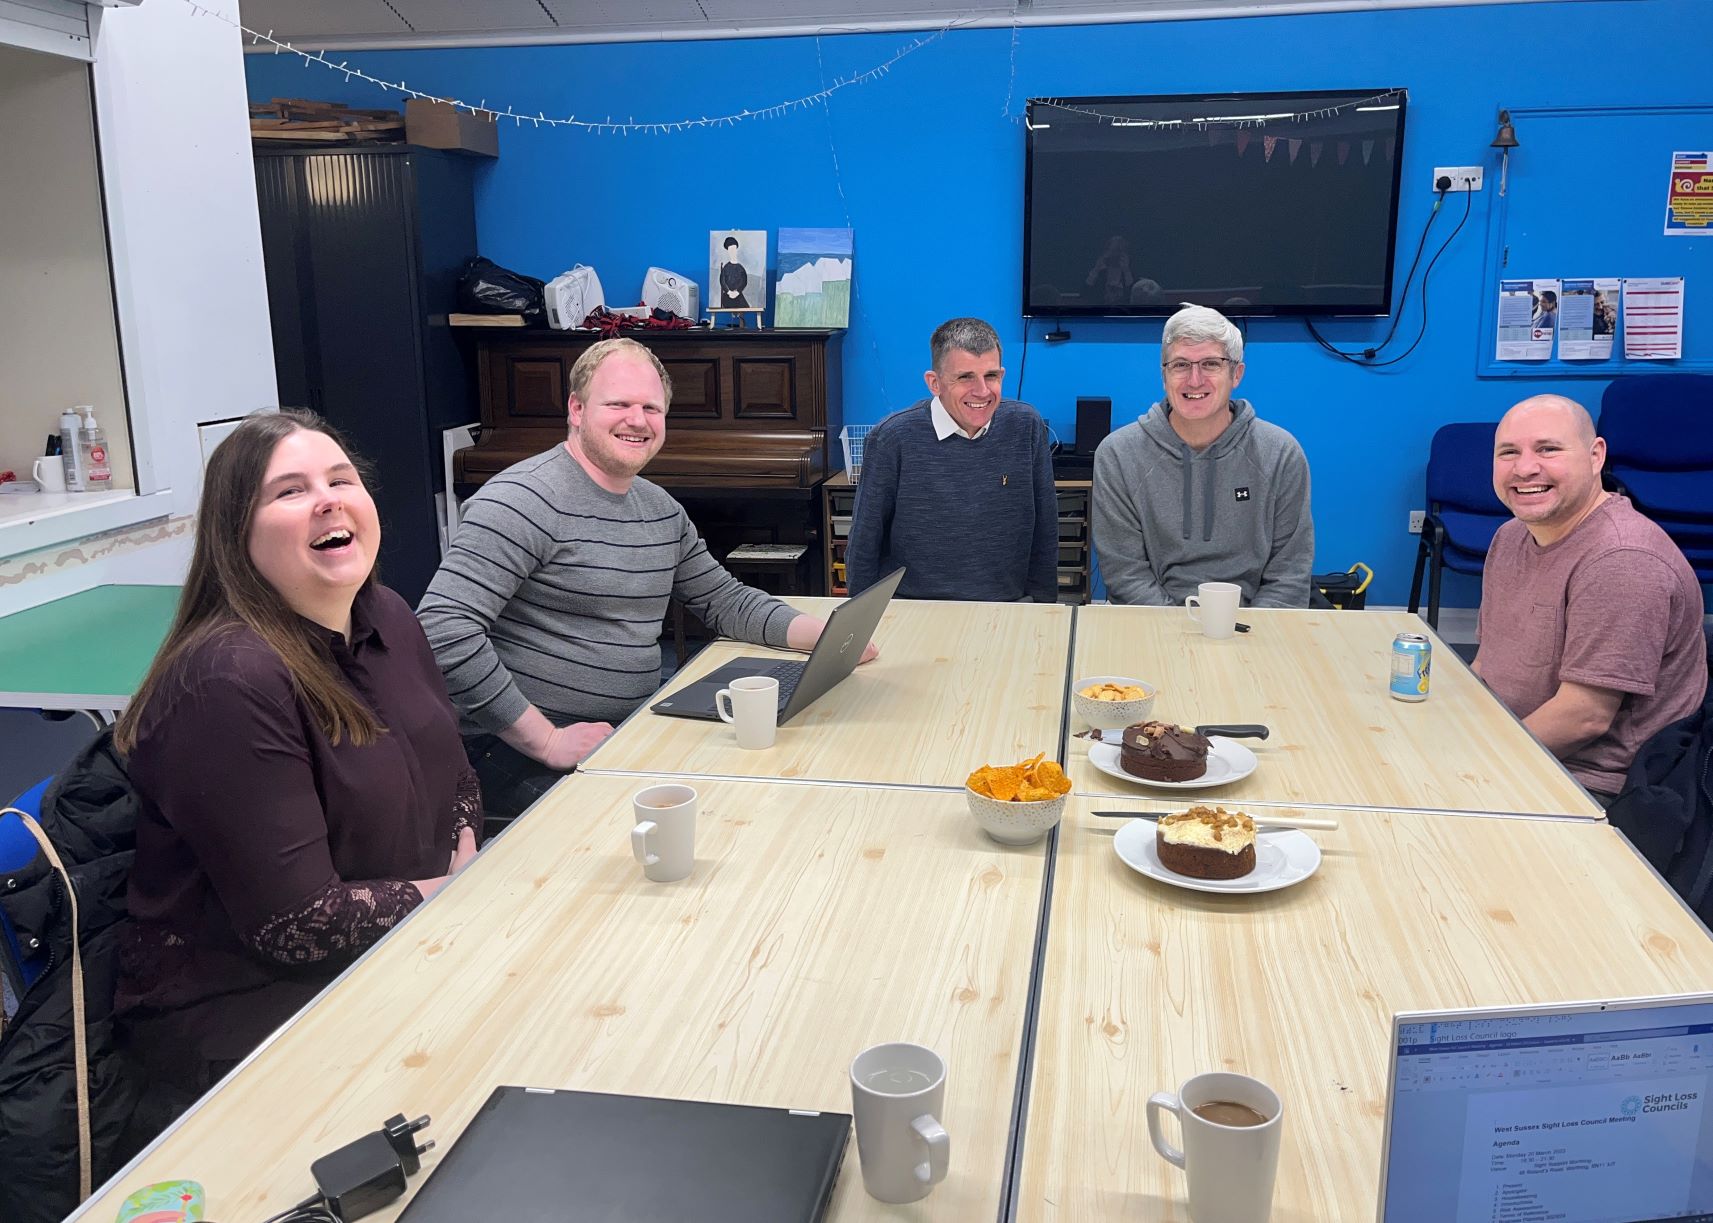 West Sussex SLC launch meeting. Members are sat around a table with tea and cake.. Everyone is laughing and smiling at the camera. From left to right: Maria Dowswell, James Langley, Dave Smith, Engagement manager for South East England, Clinton Corin and Richard Deadman.